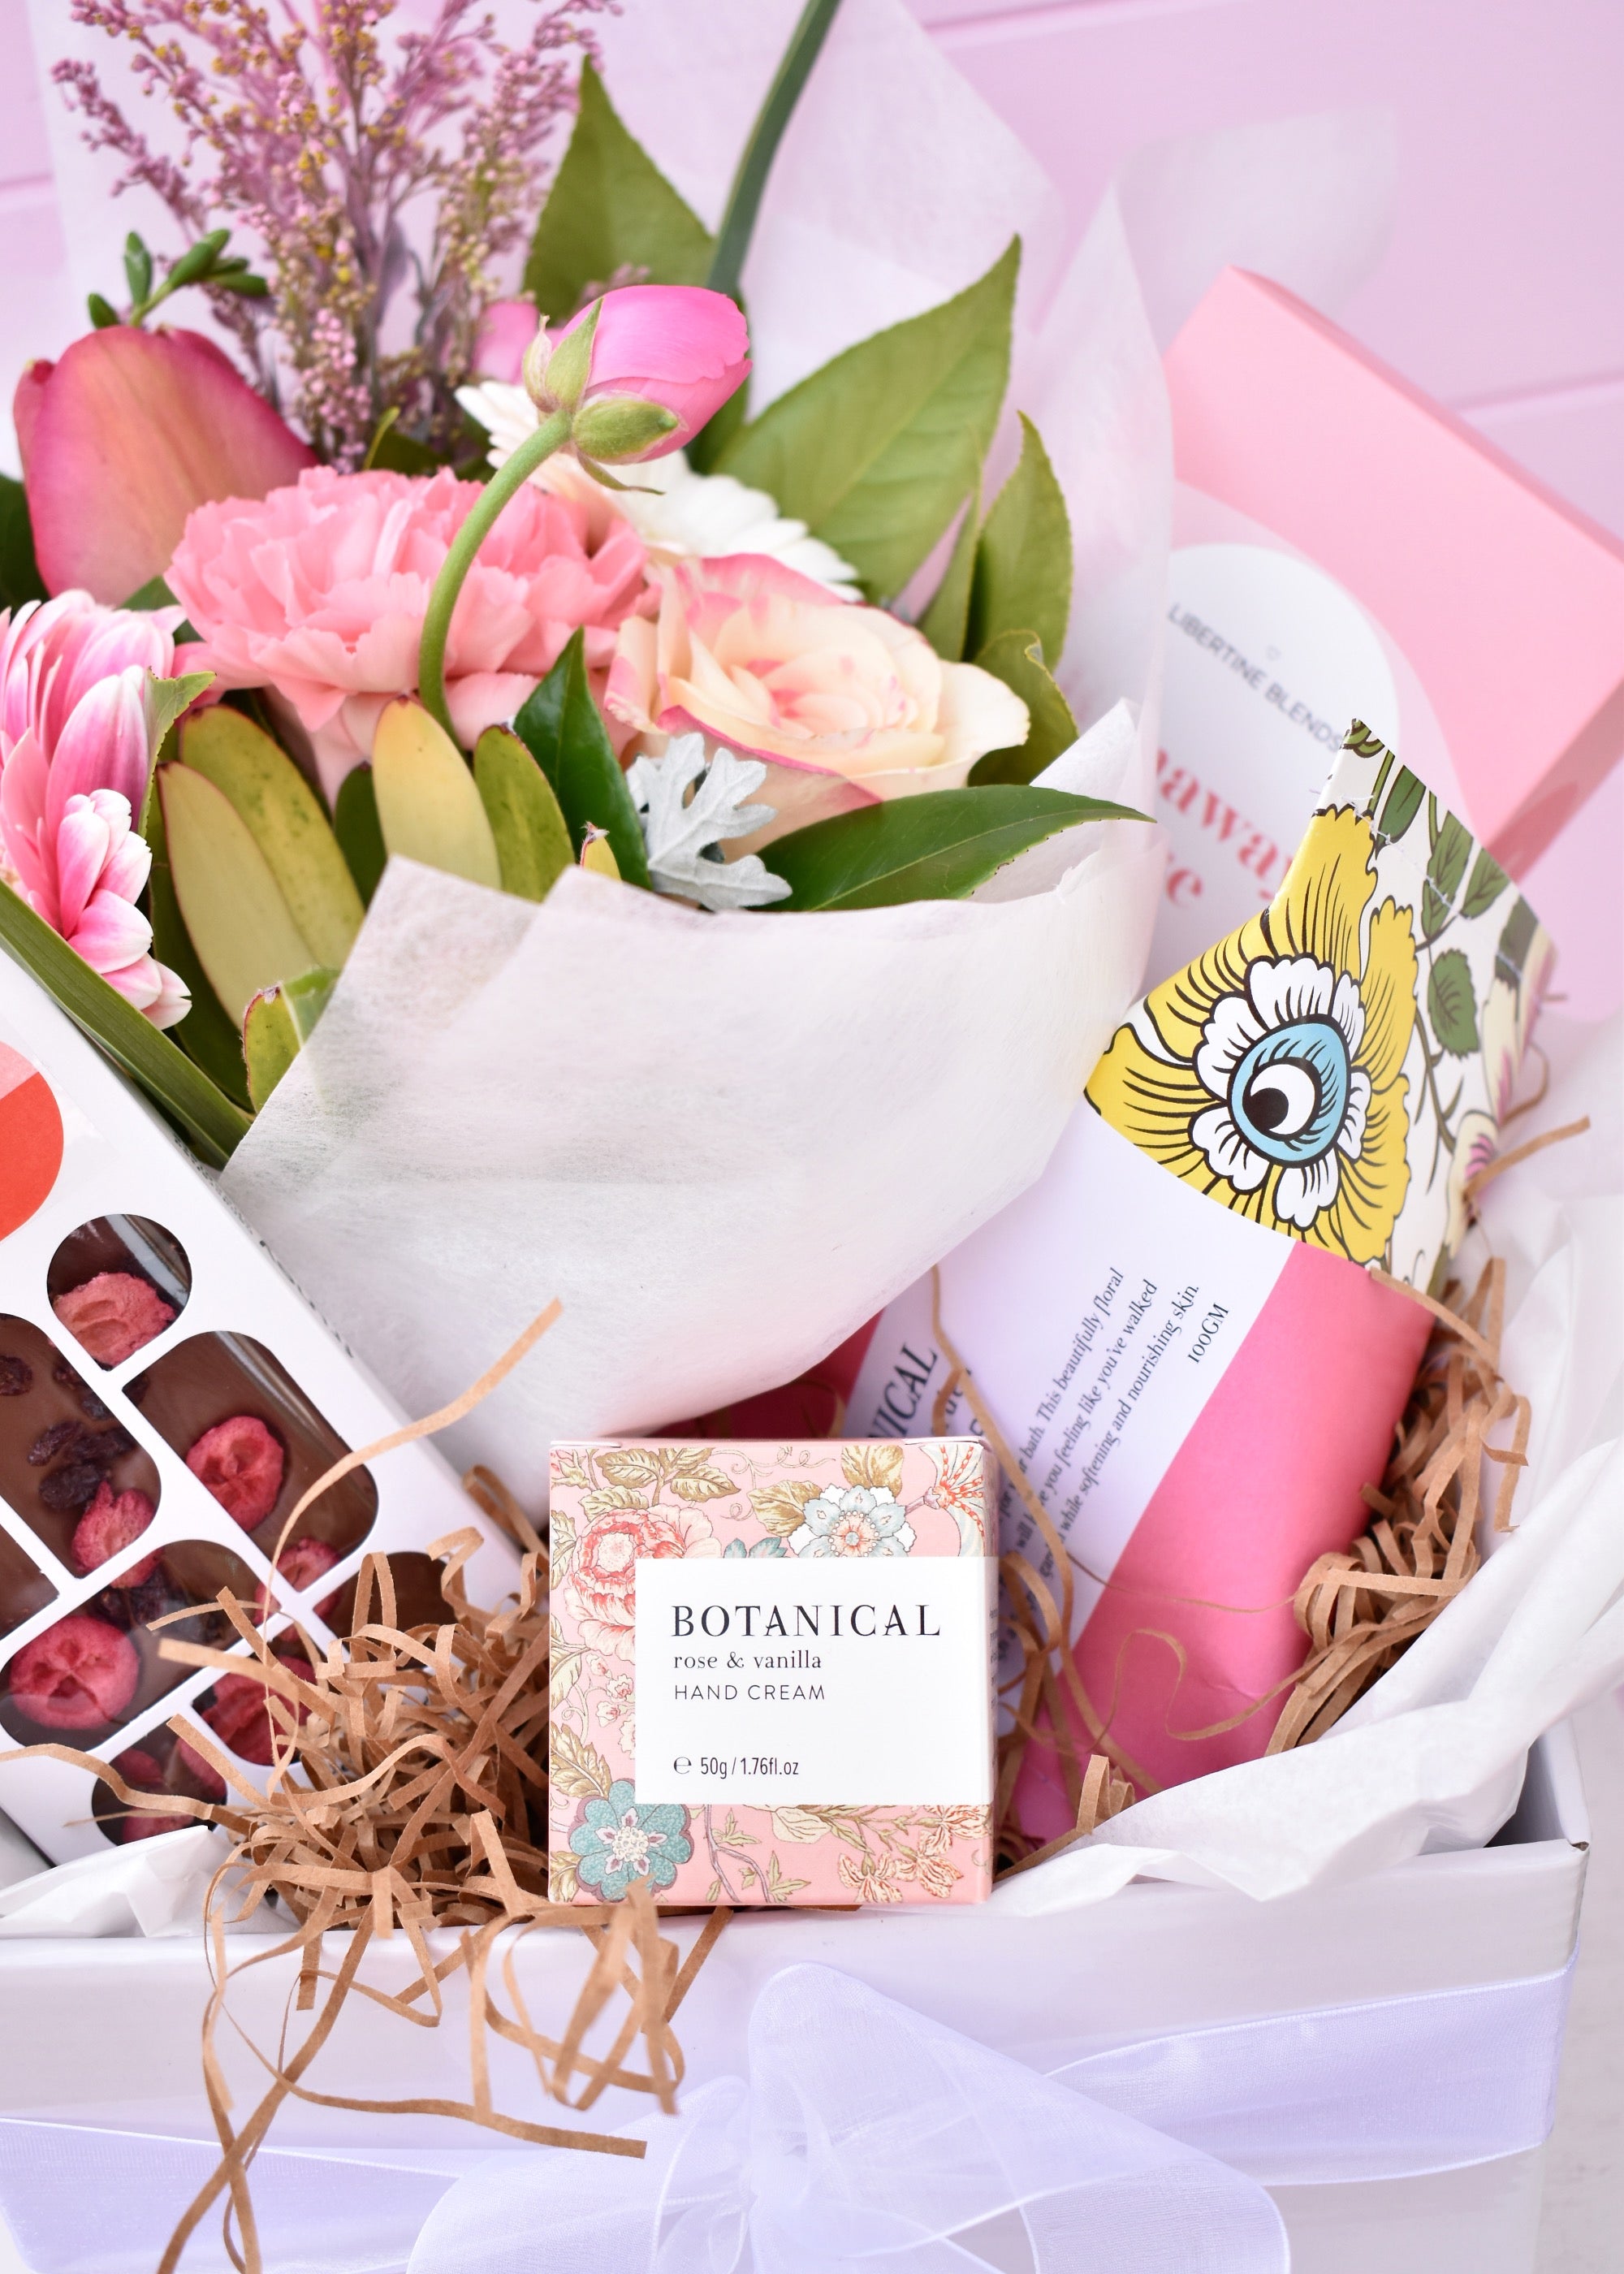 A gift box created by a florist. Fresh flower posy, box of floral hand cream, chocolate and strawberry bar, botanical bath bomb and rose tea.